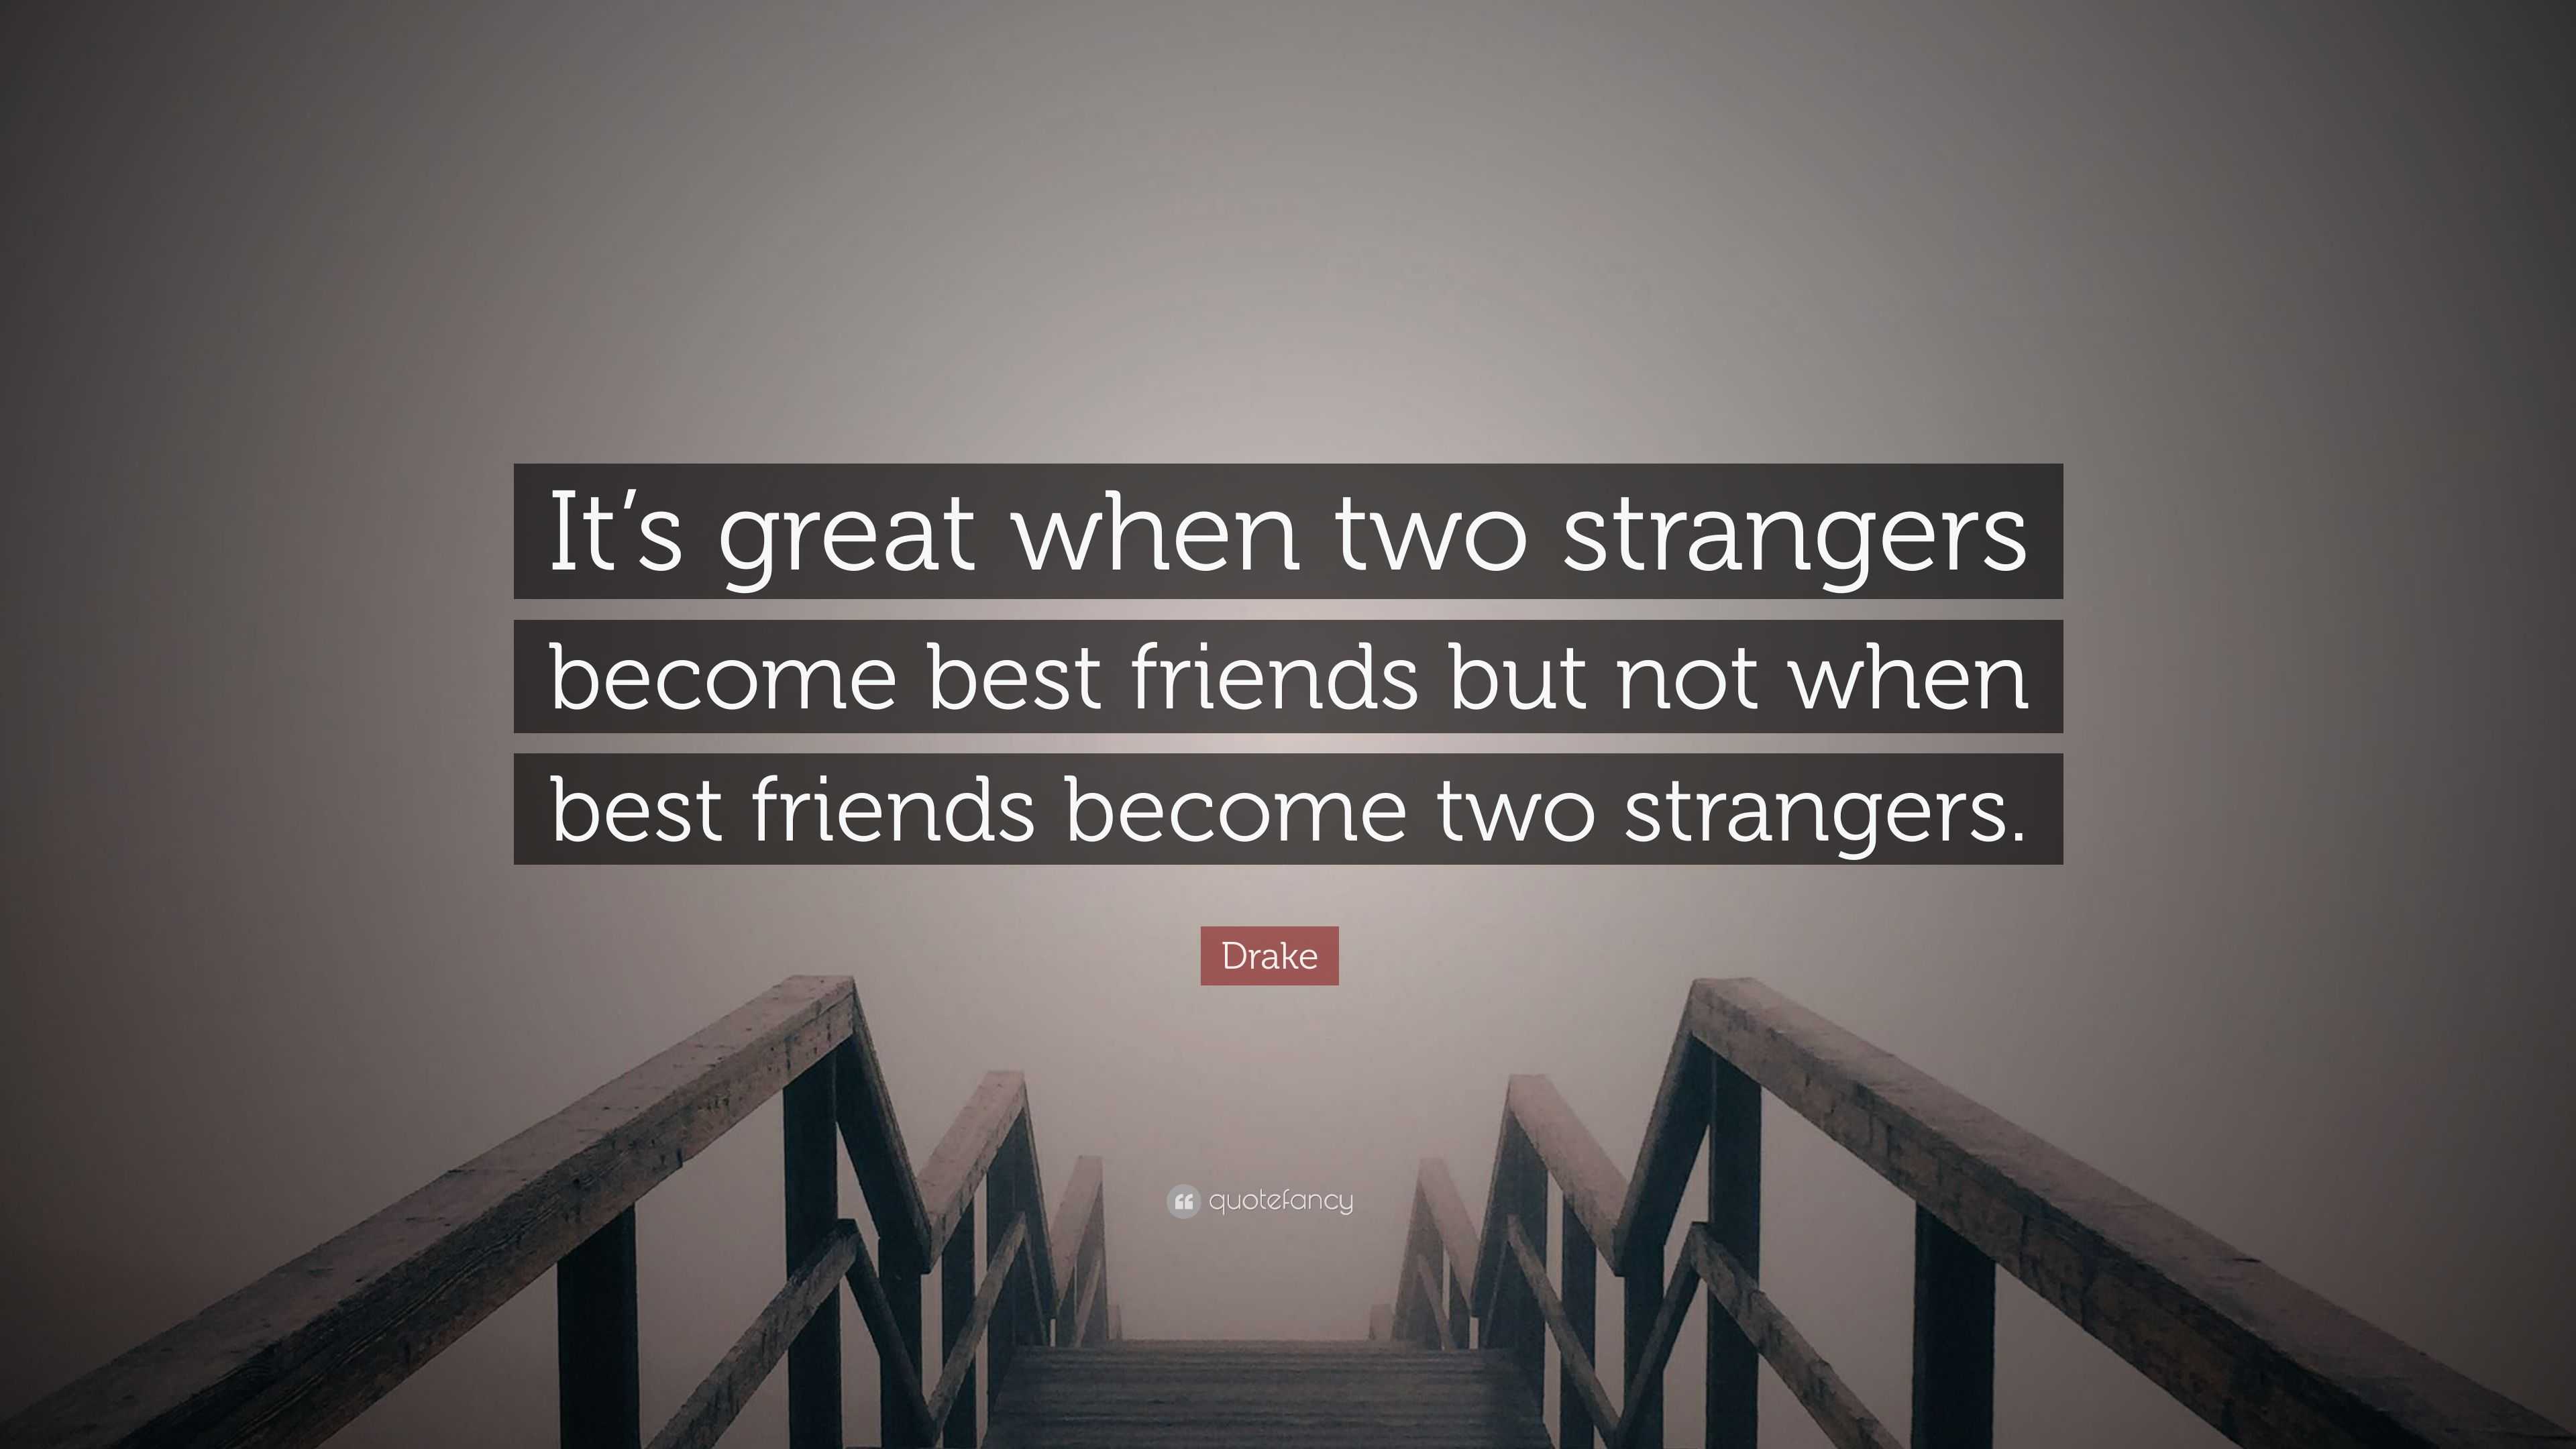 Drake Quote: “It's great when two strangers become best friends but not  when best friends become